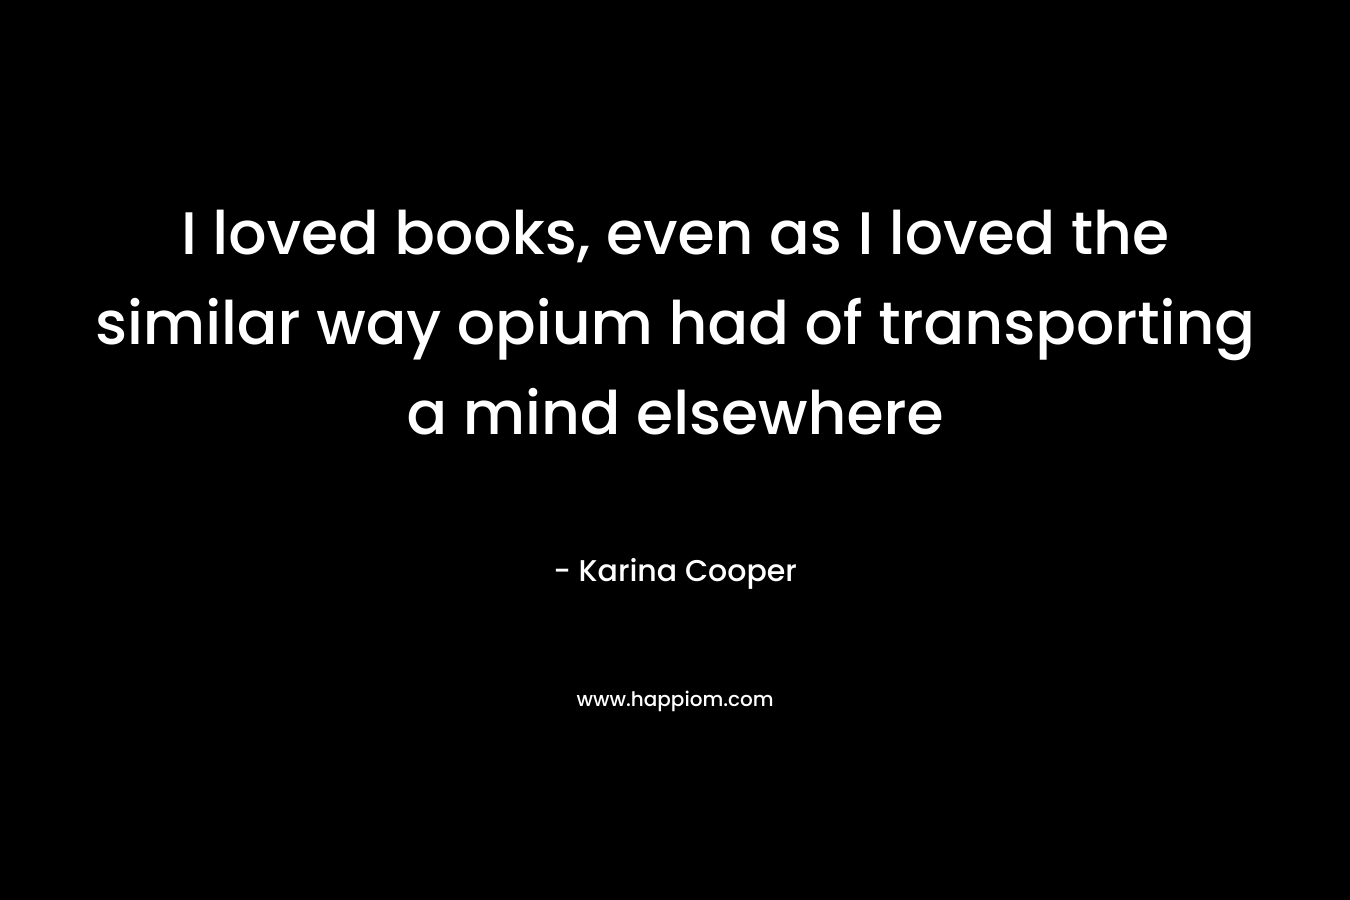 I loved books, even as I loved the similar way opium had of transporting a mind elsewhere